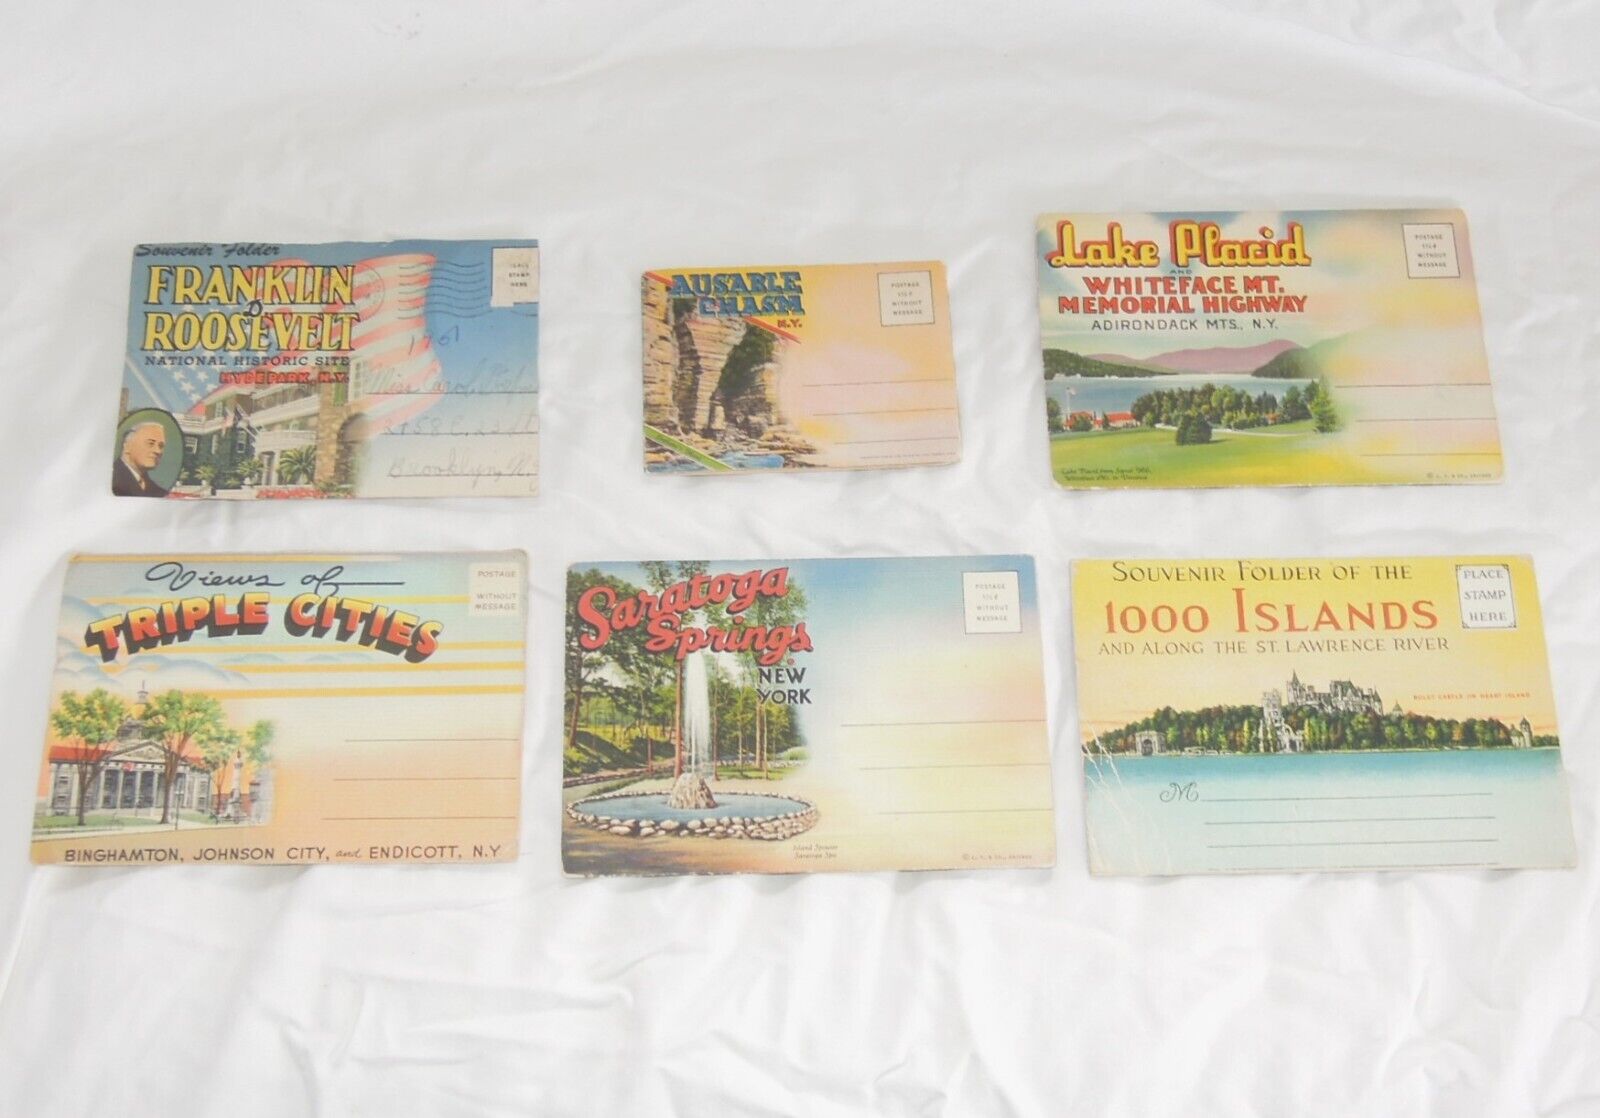 6 different Vintage Postcard Souvenir Folders  New York State attractions